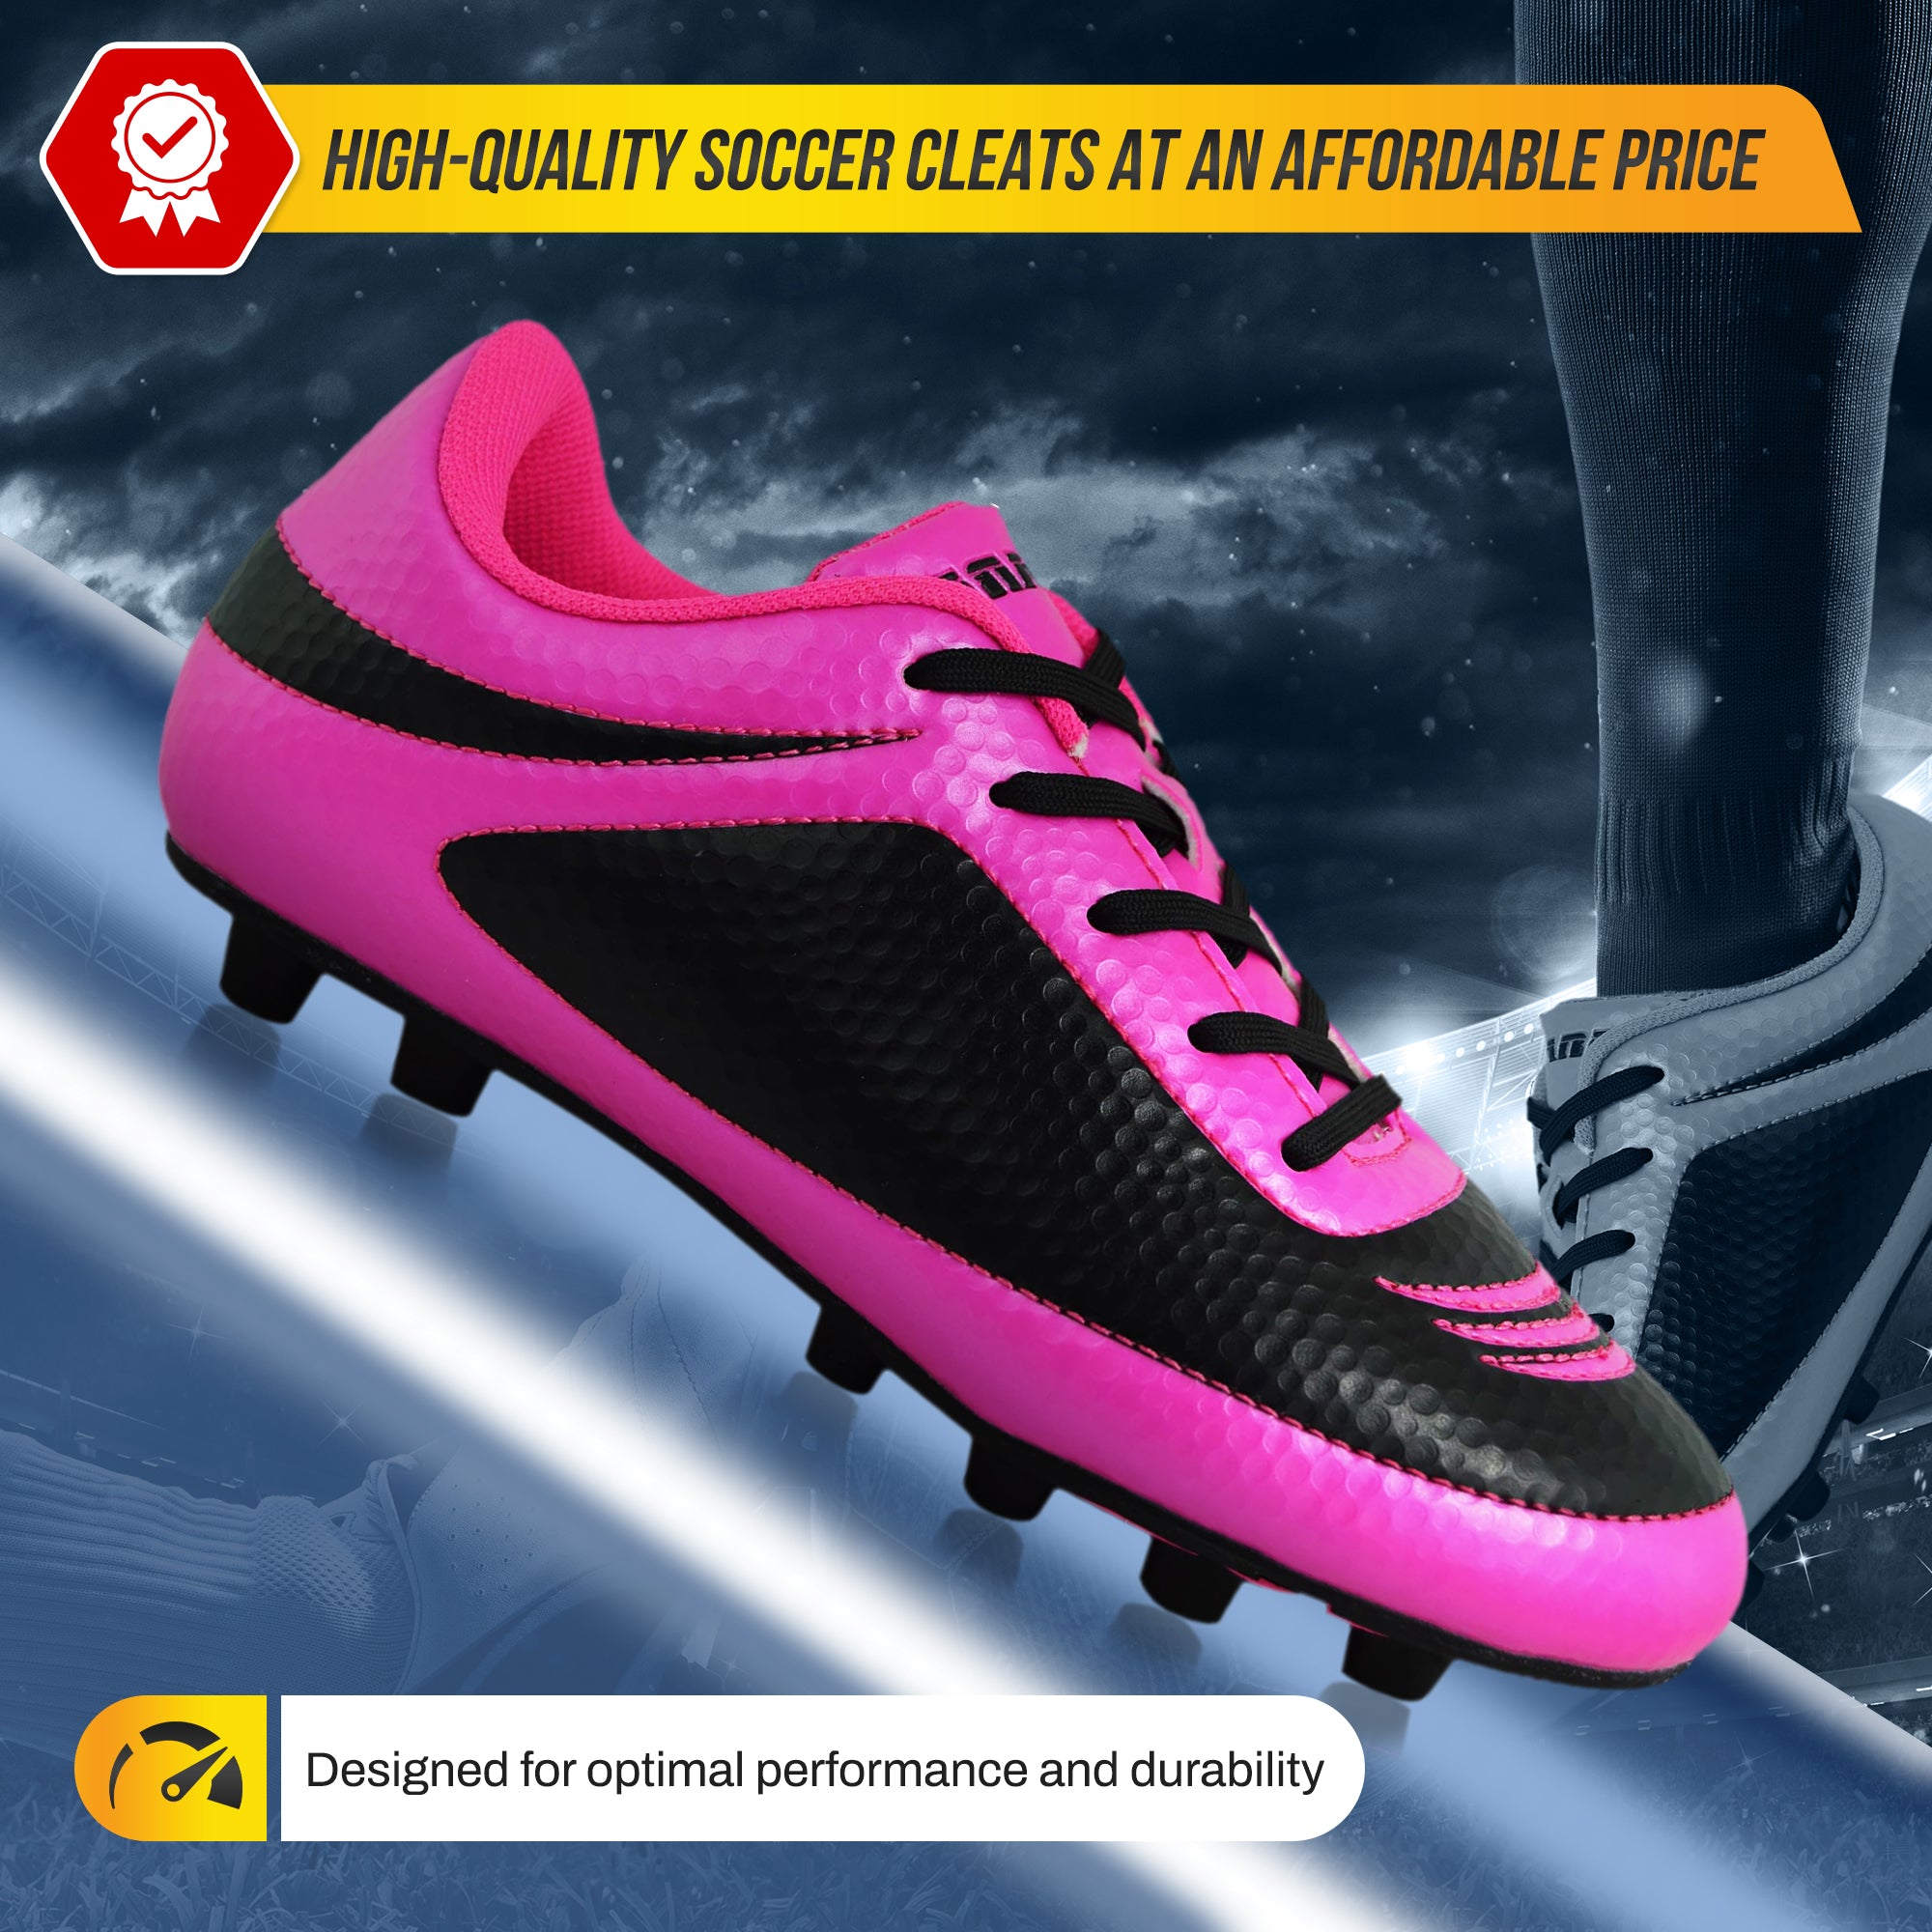 Infinity Firm Ground Soccer Shoes -Pink/Black